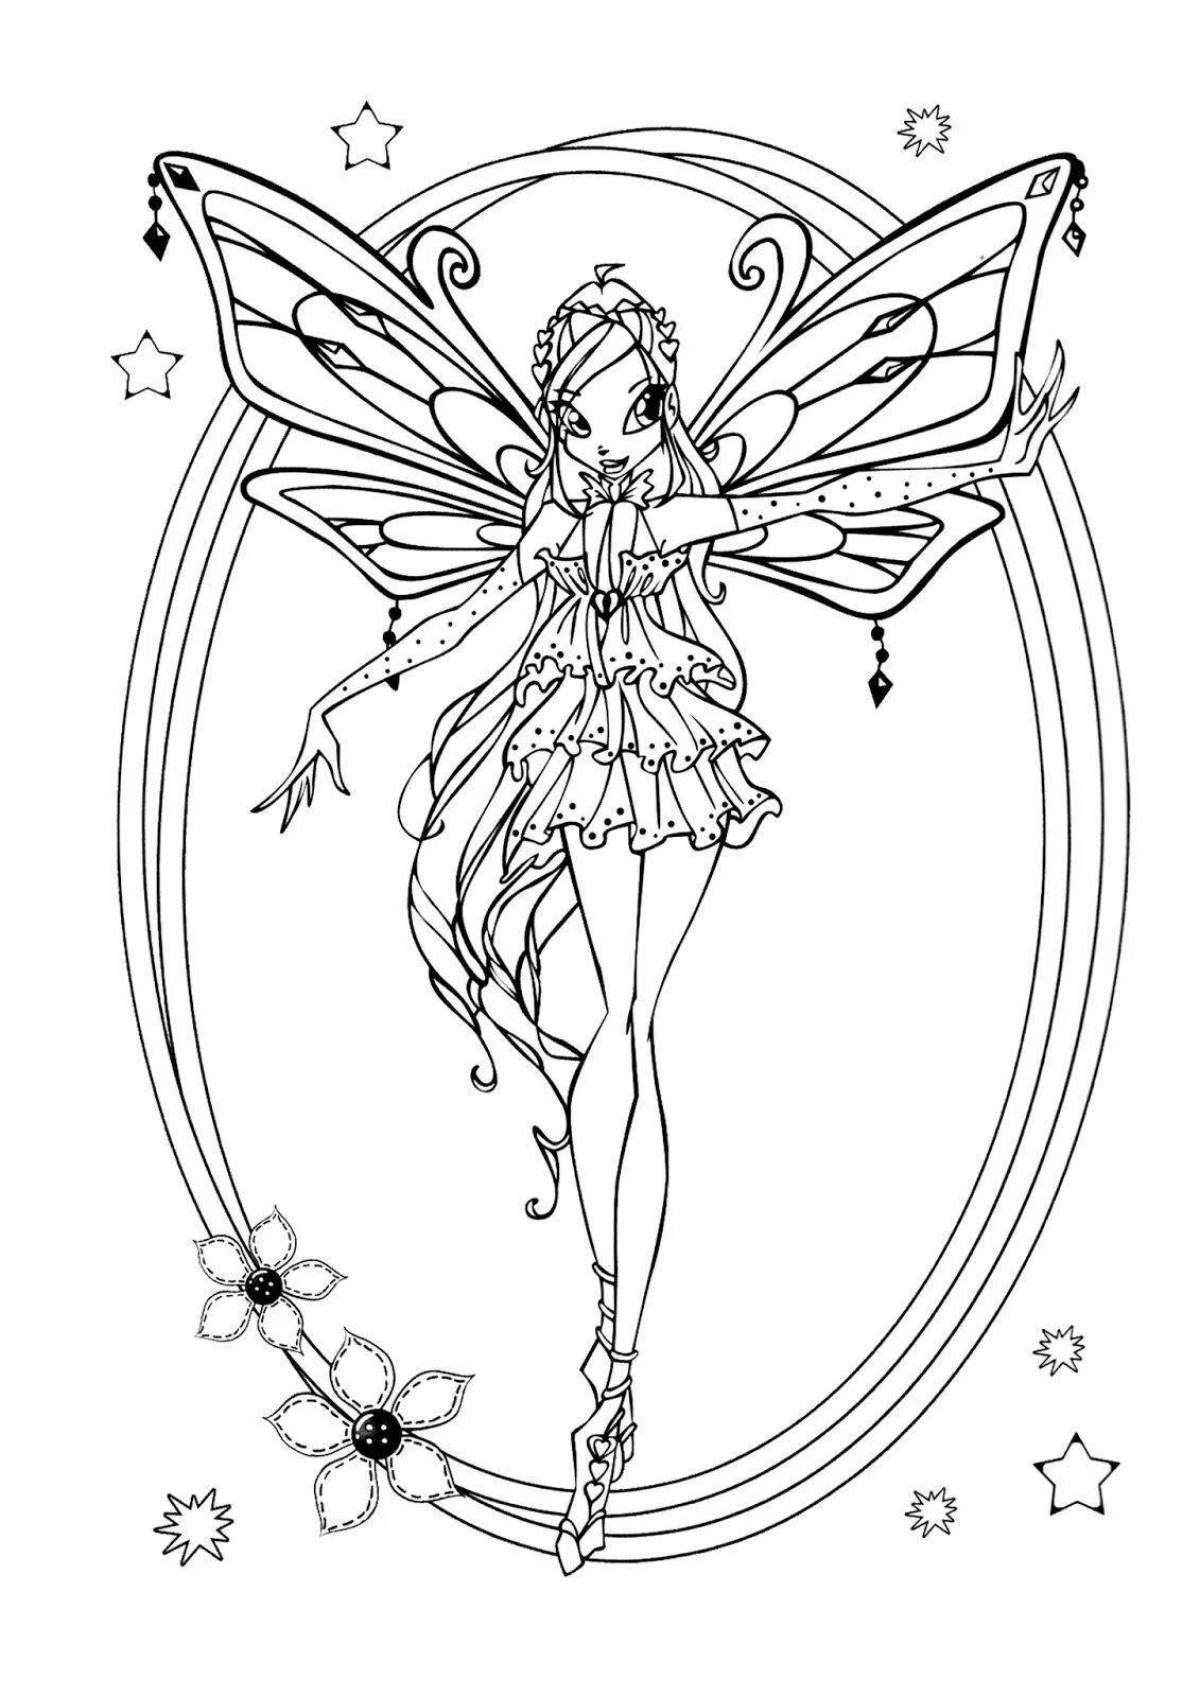 Awesome Winx Bloom Enchantix coloring book